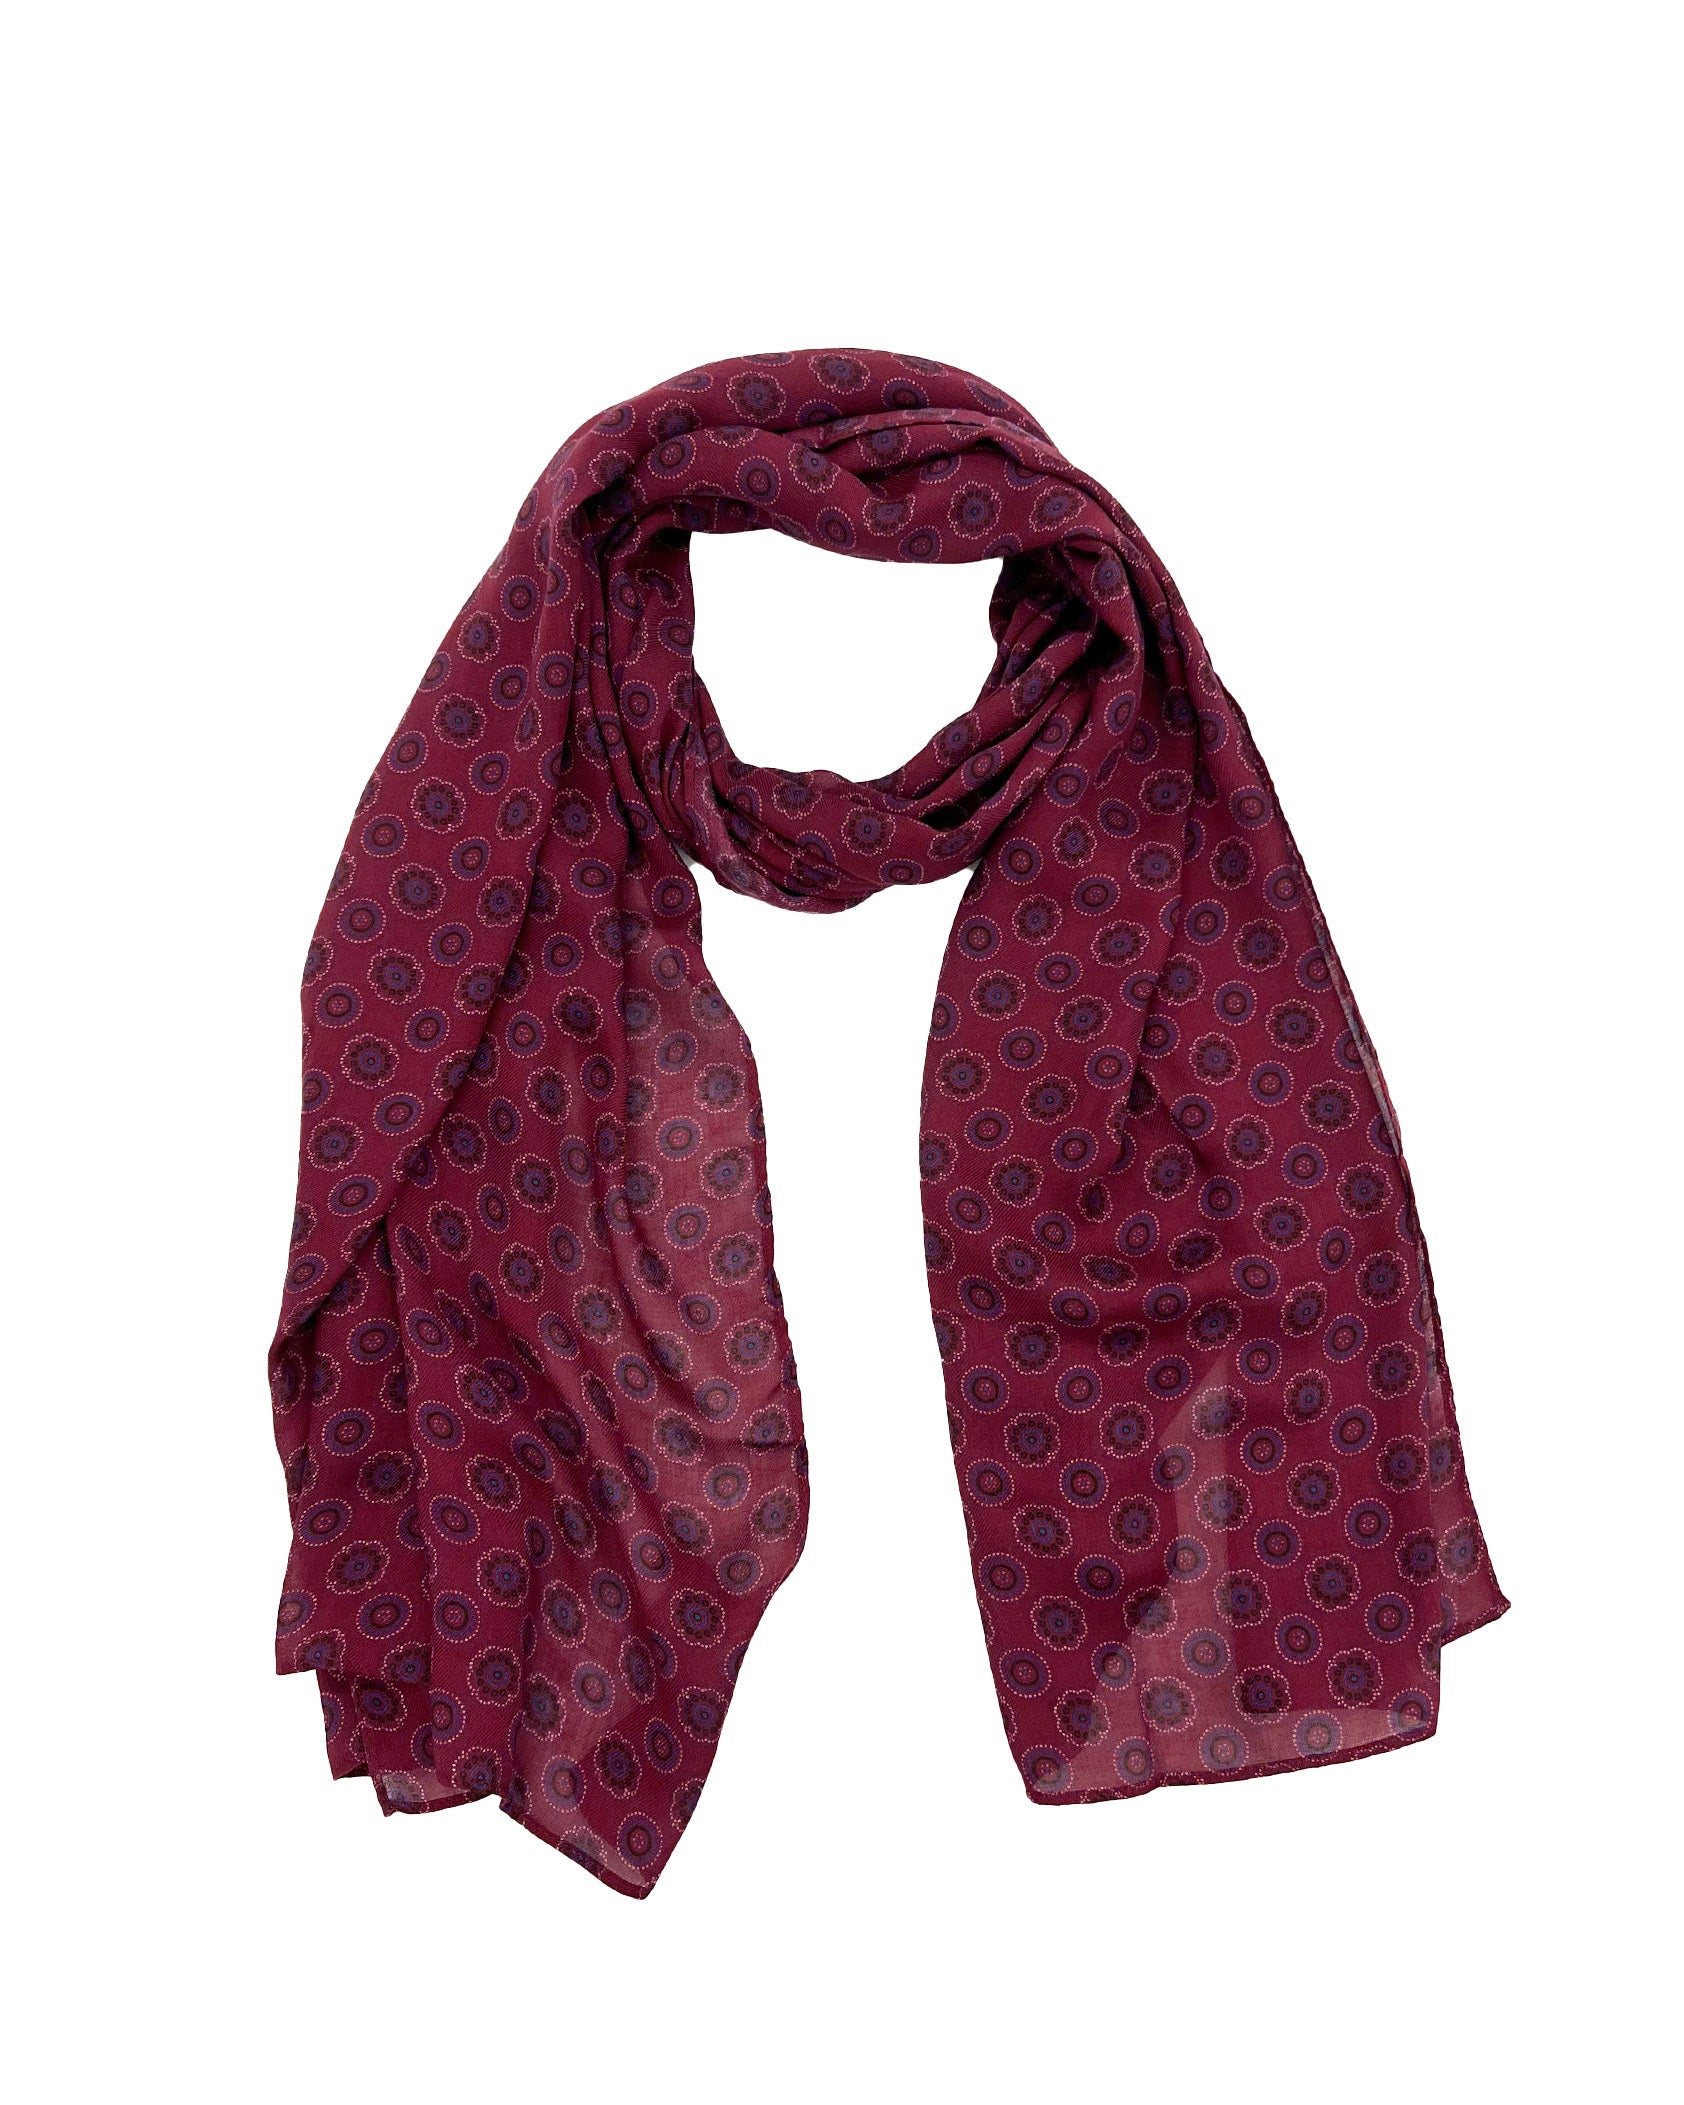 The Seattle wide scarf unravelled and looped in the middle, demonstrating the considerable length and showing the floral and circular patterns on a maroon ground.